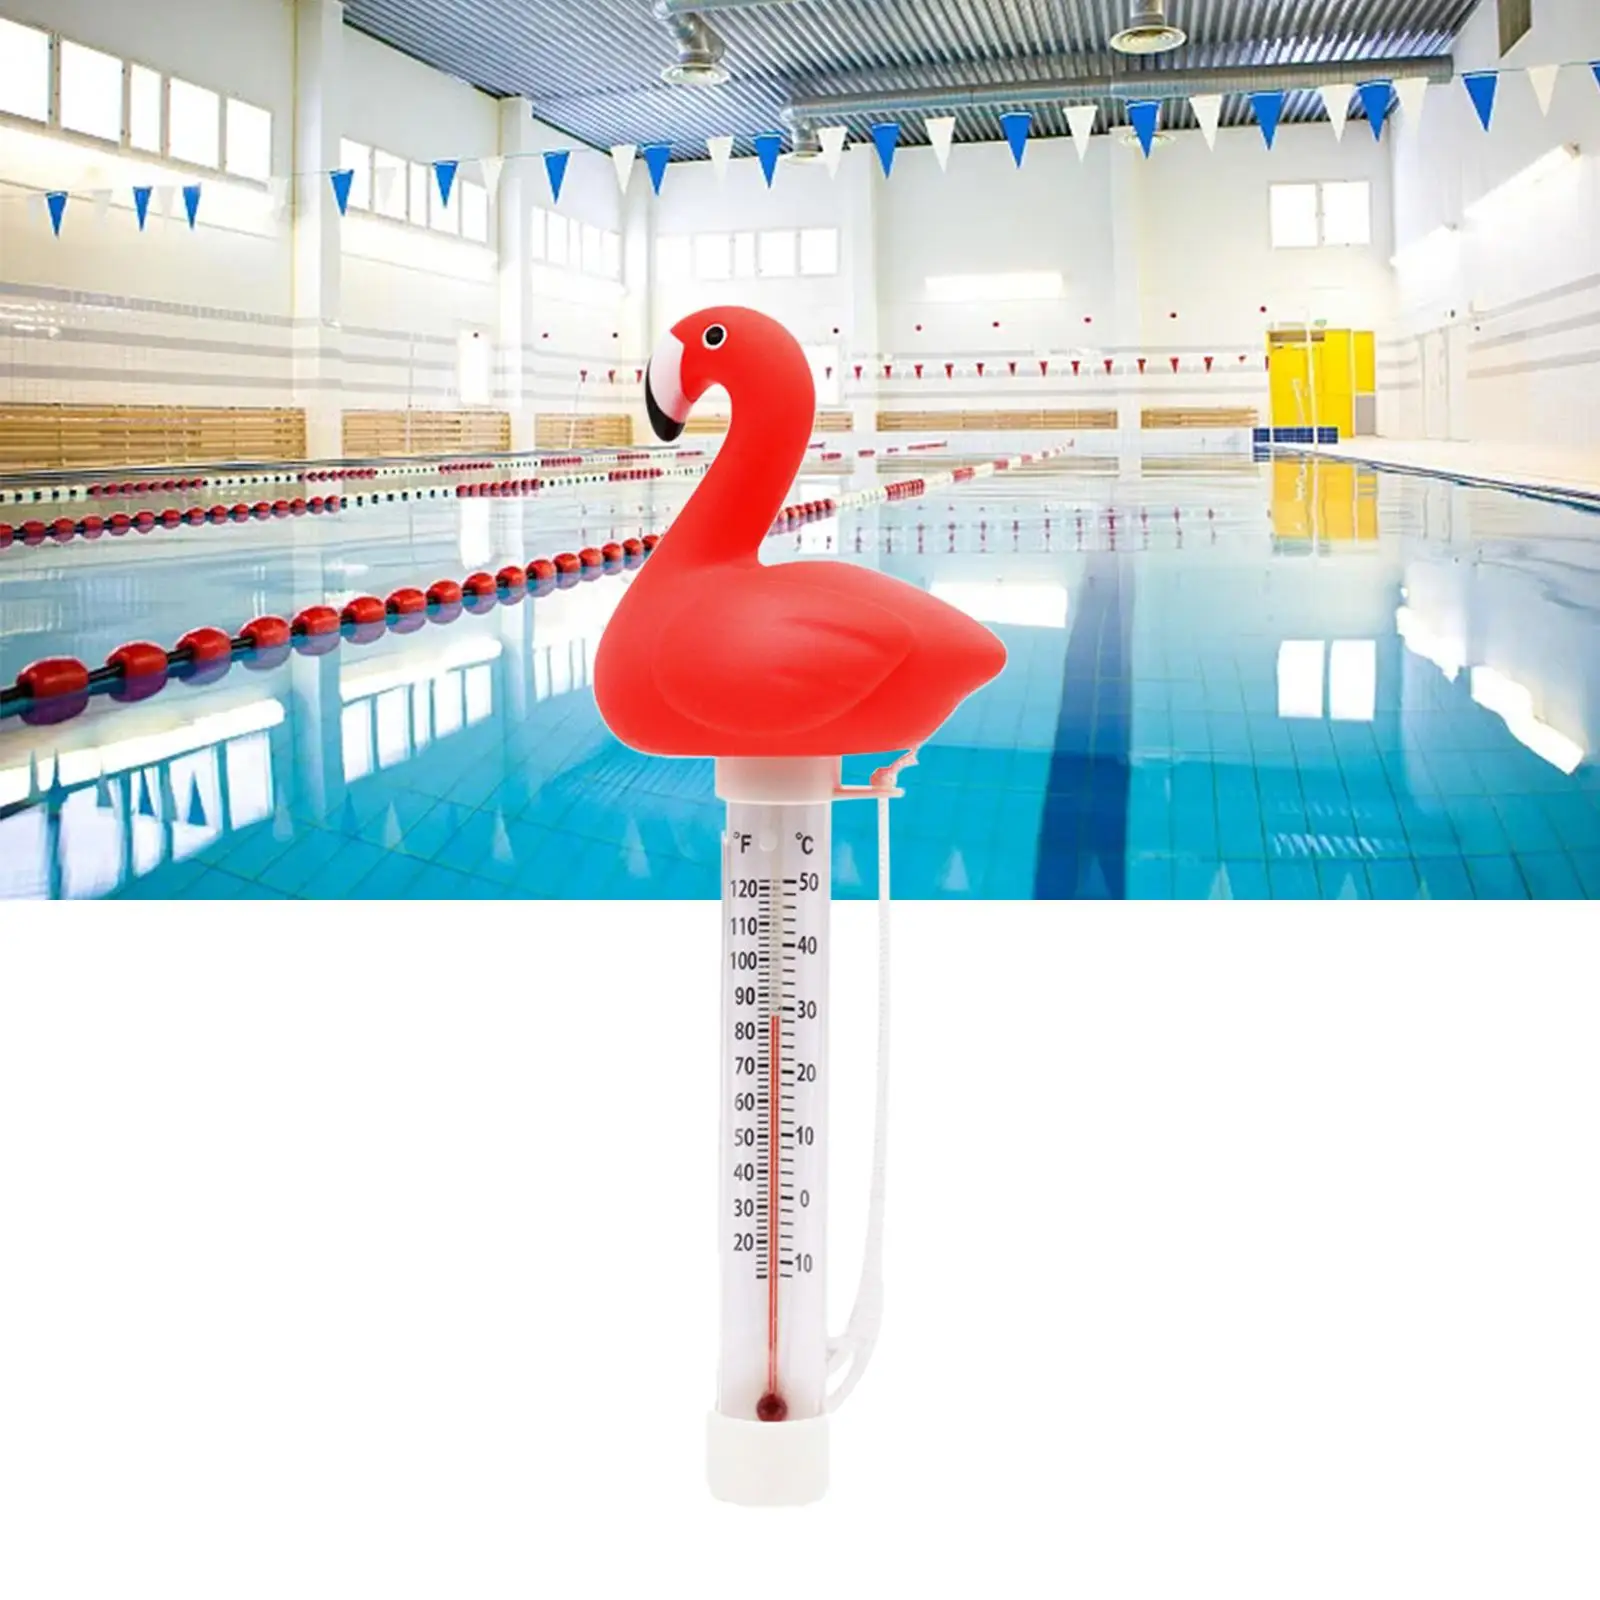 

Flamingo Gauge SPA Indoor Outdoor Swimming Pool Floating Pool Thermometer for Aquariums Fish Tank Ice Bath Paddling Pool Shower